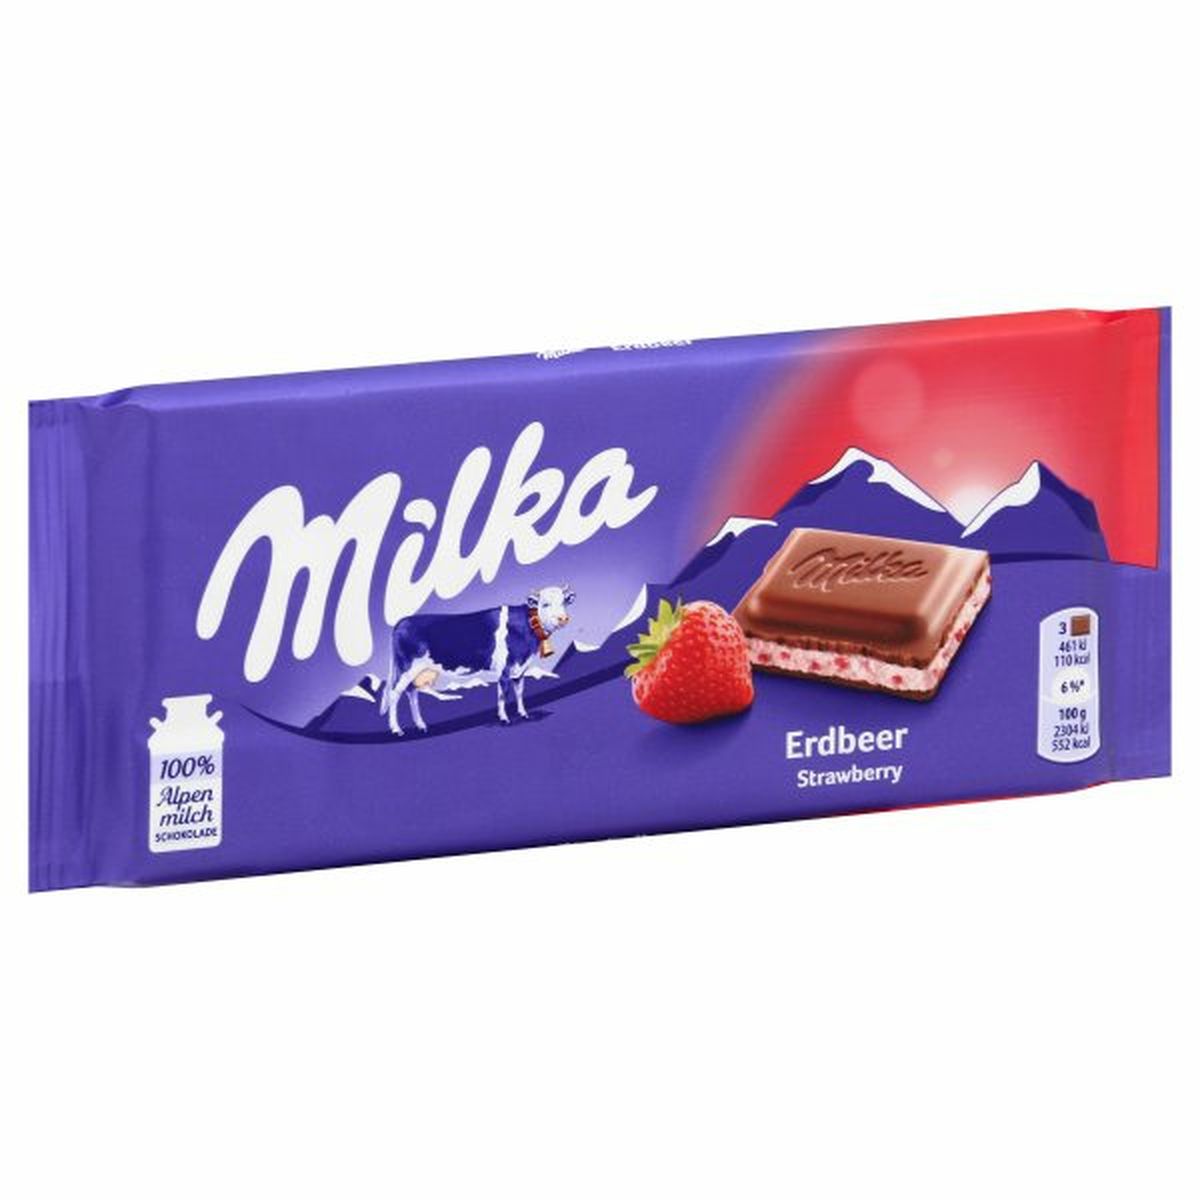 Calories in Milka Chocolate, Strawberry